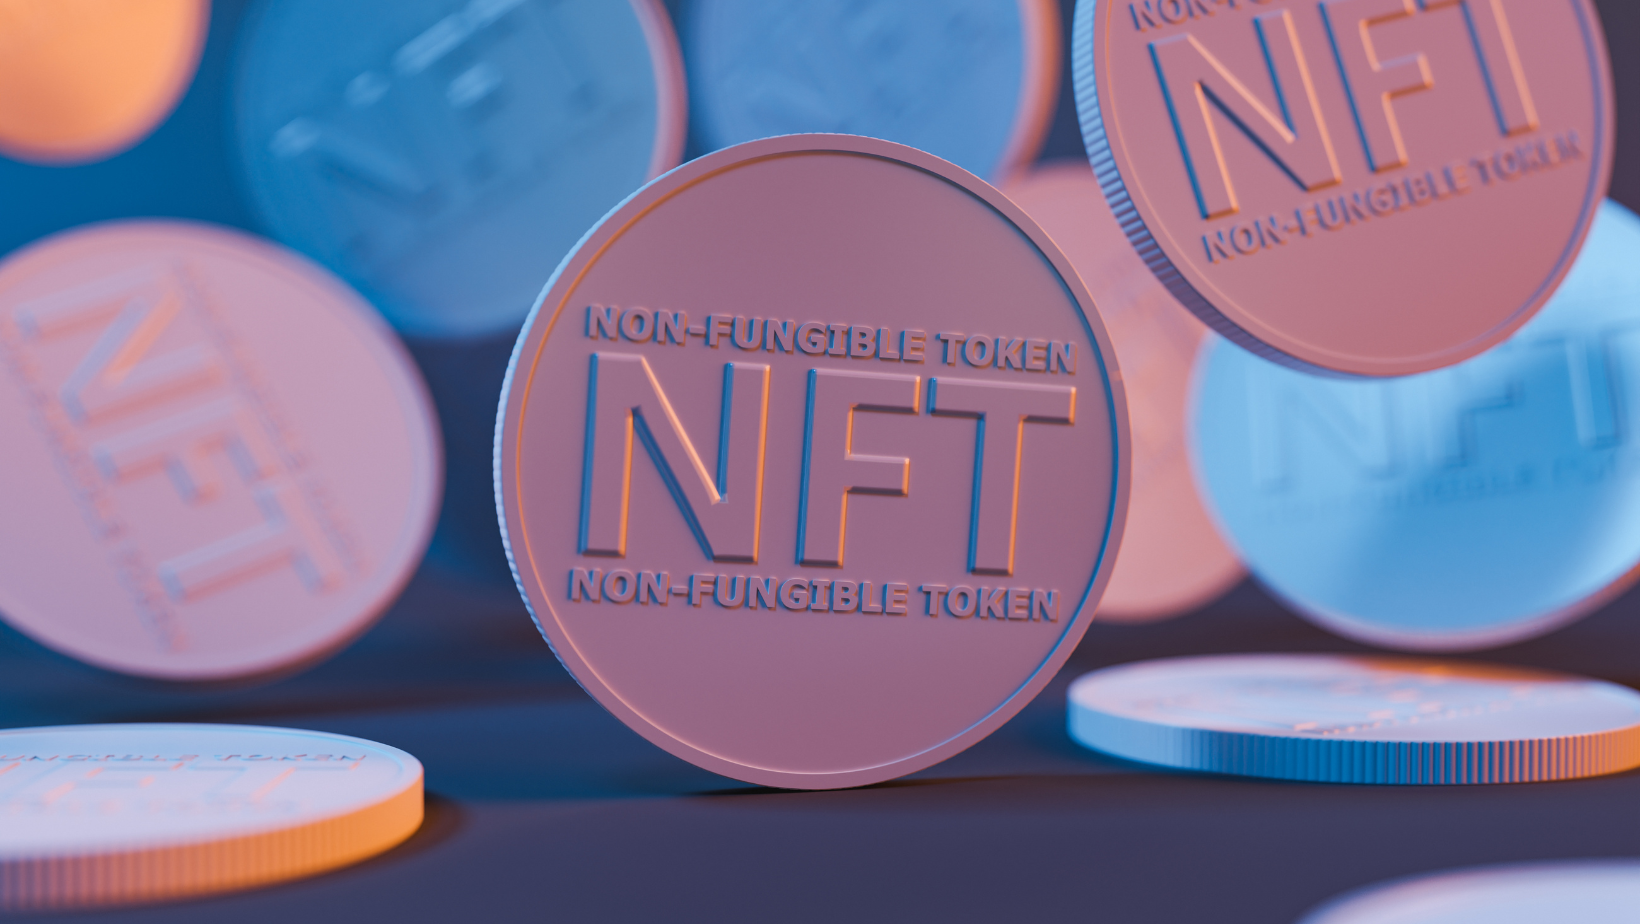 Louis Vuitton to launch NFT game with art work from Beeple - Crypto Daily